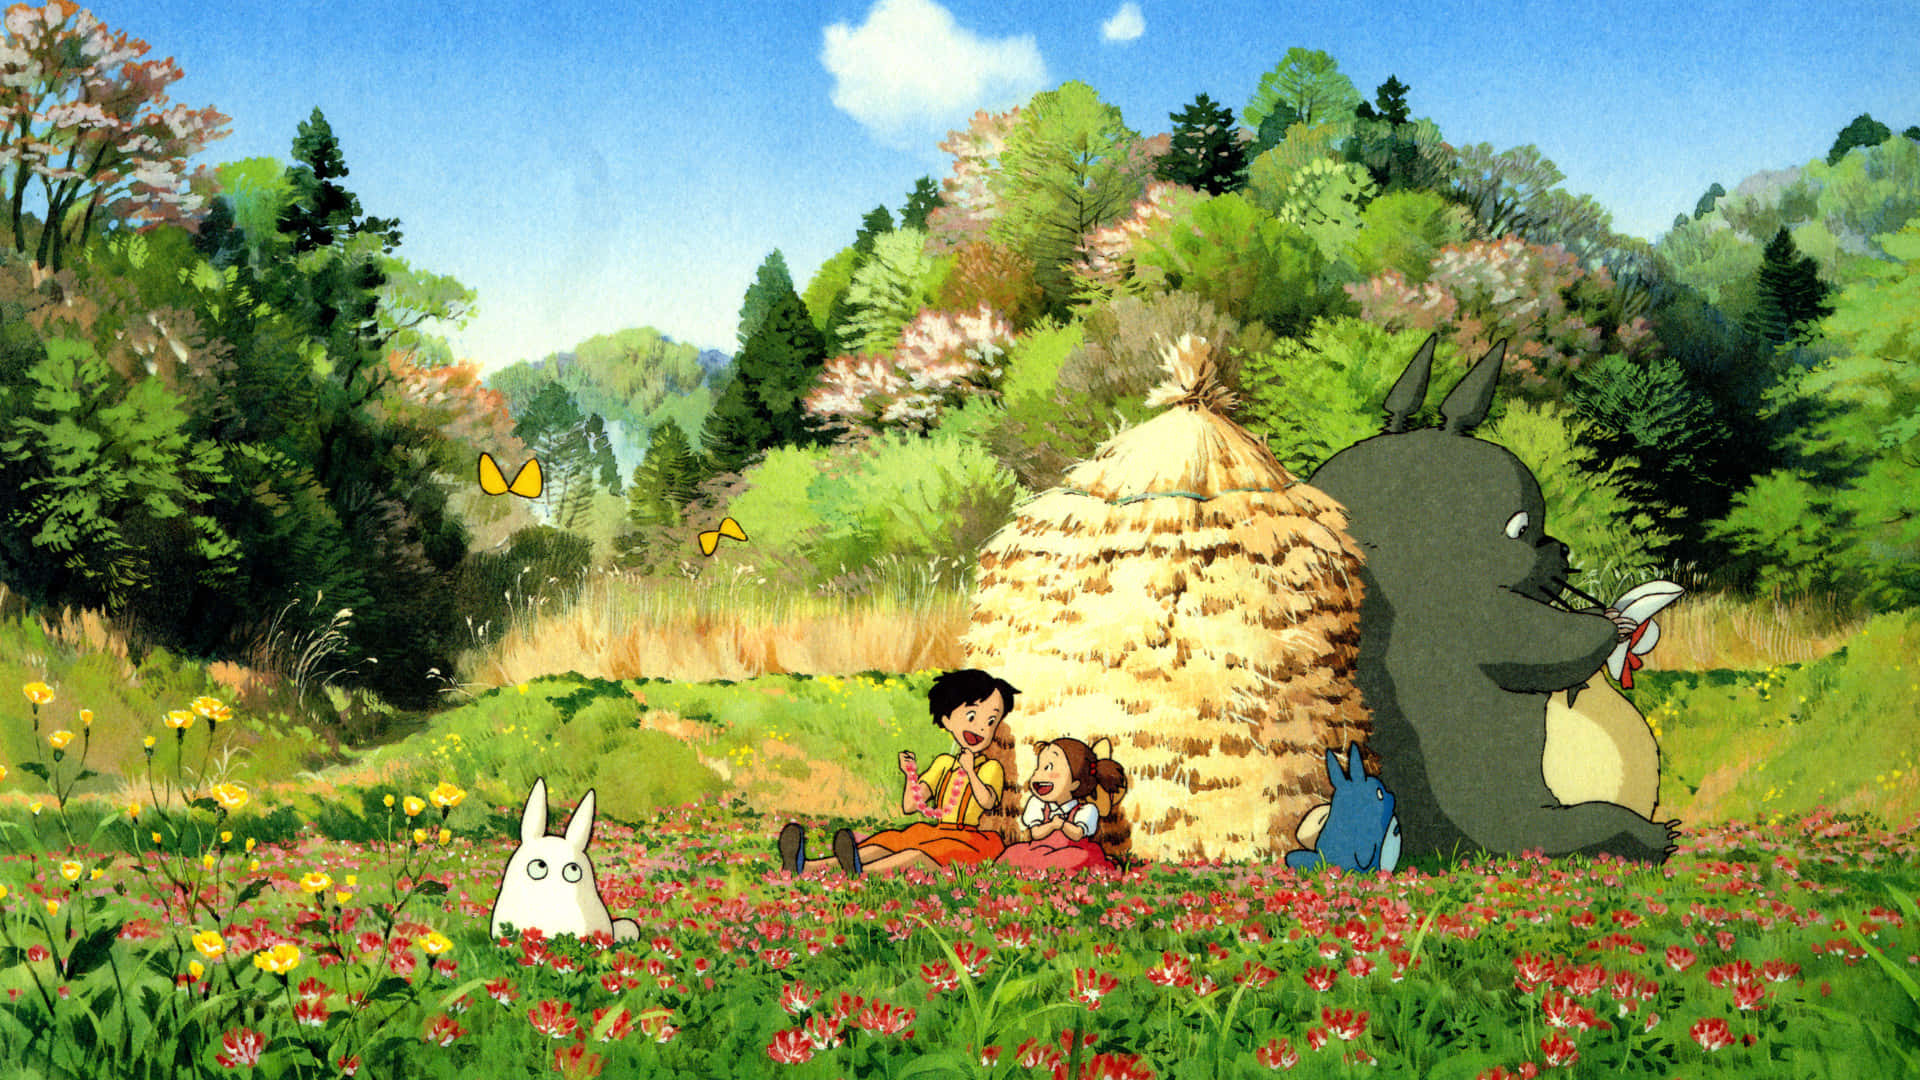 My Neighbor Totoro Characters in a Magical Forest Wallpaper